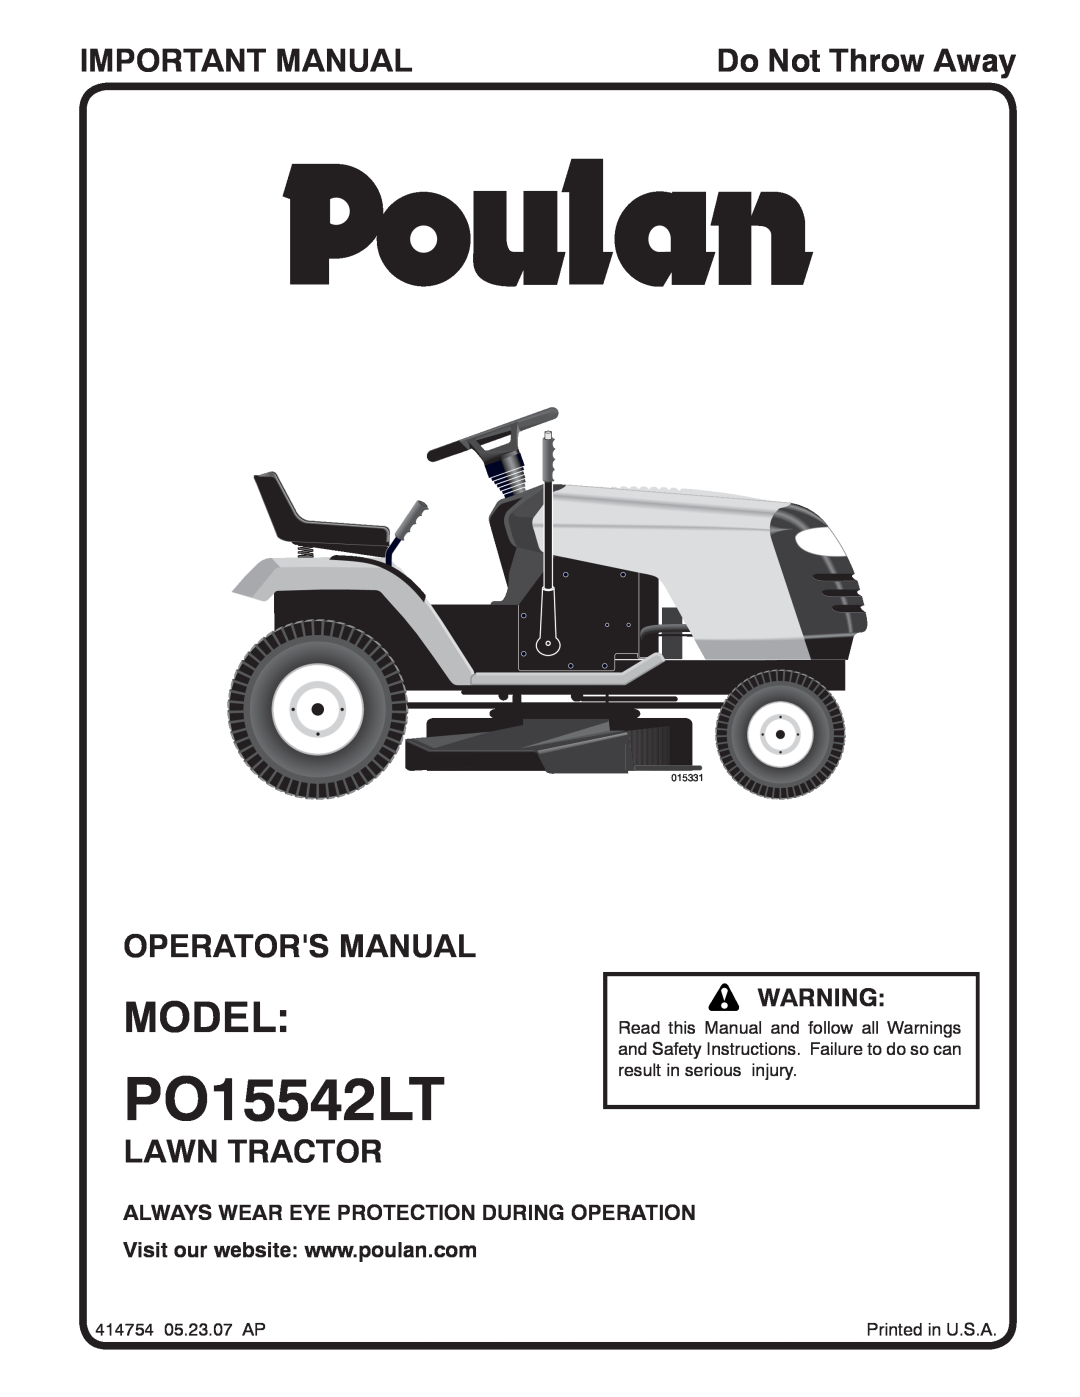 Poulan PO15542LT manual Model, Important Manual, Operators Manual, Lawn Tractor, Do Not Throw Away, 015331 